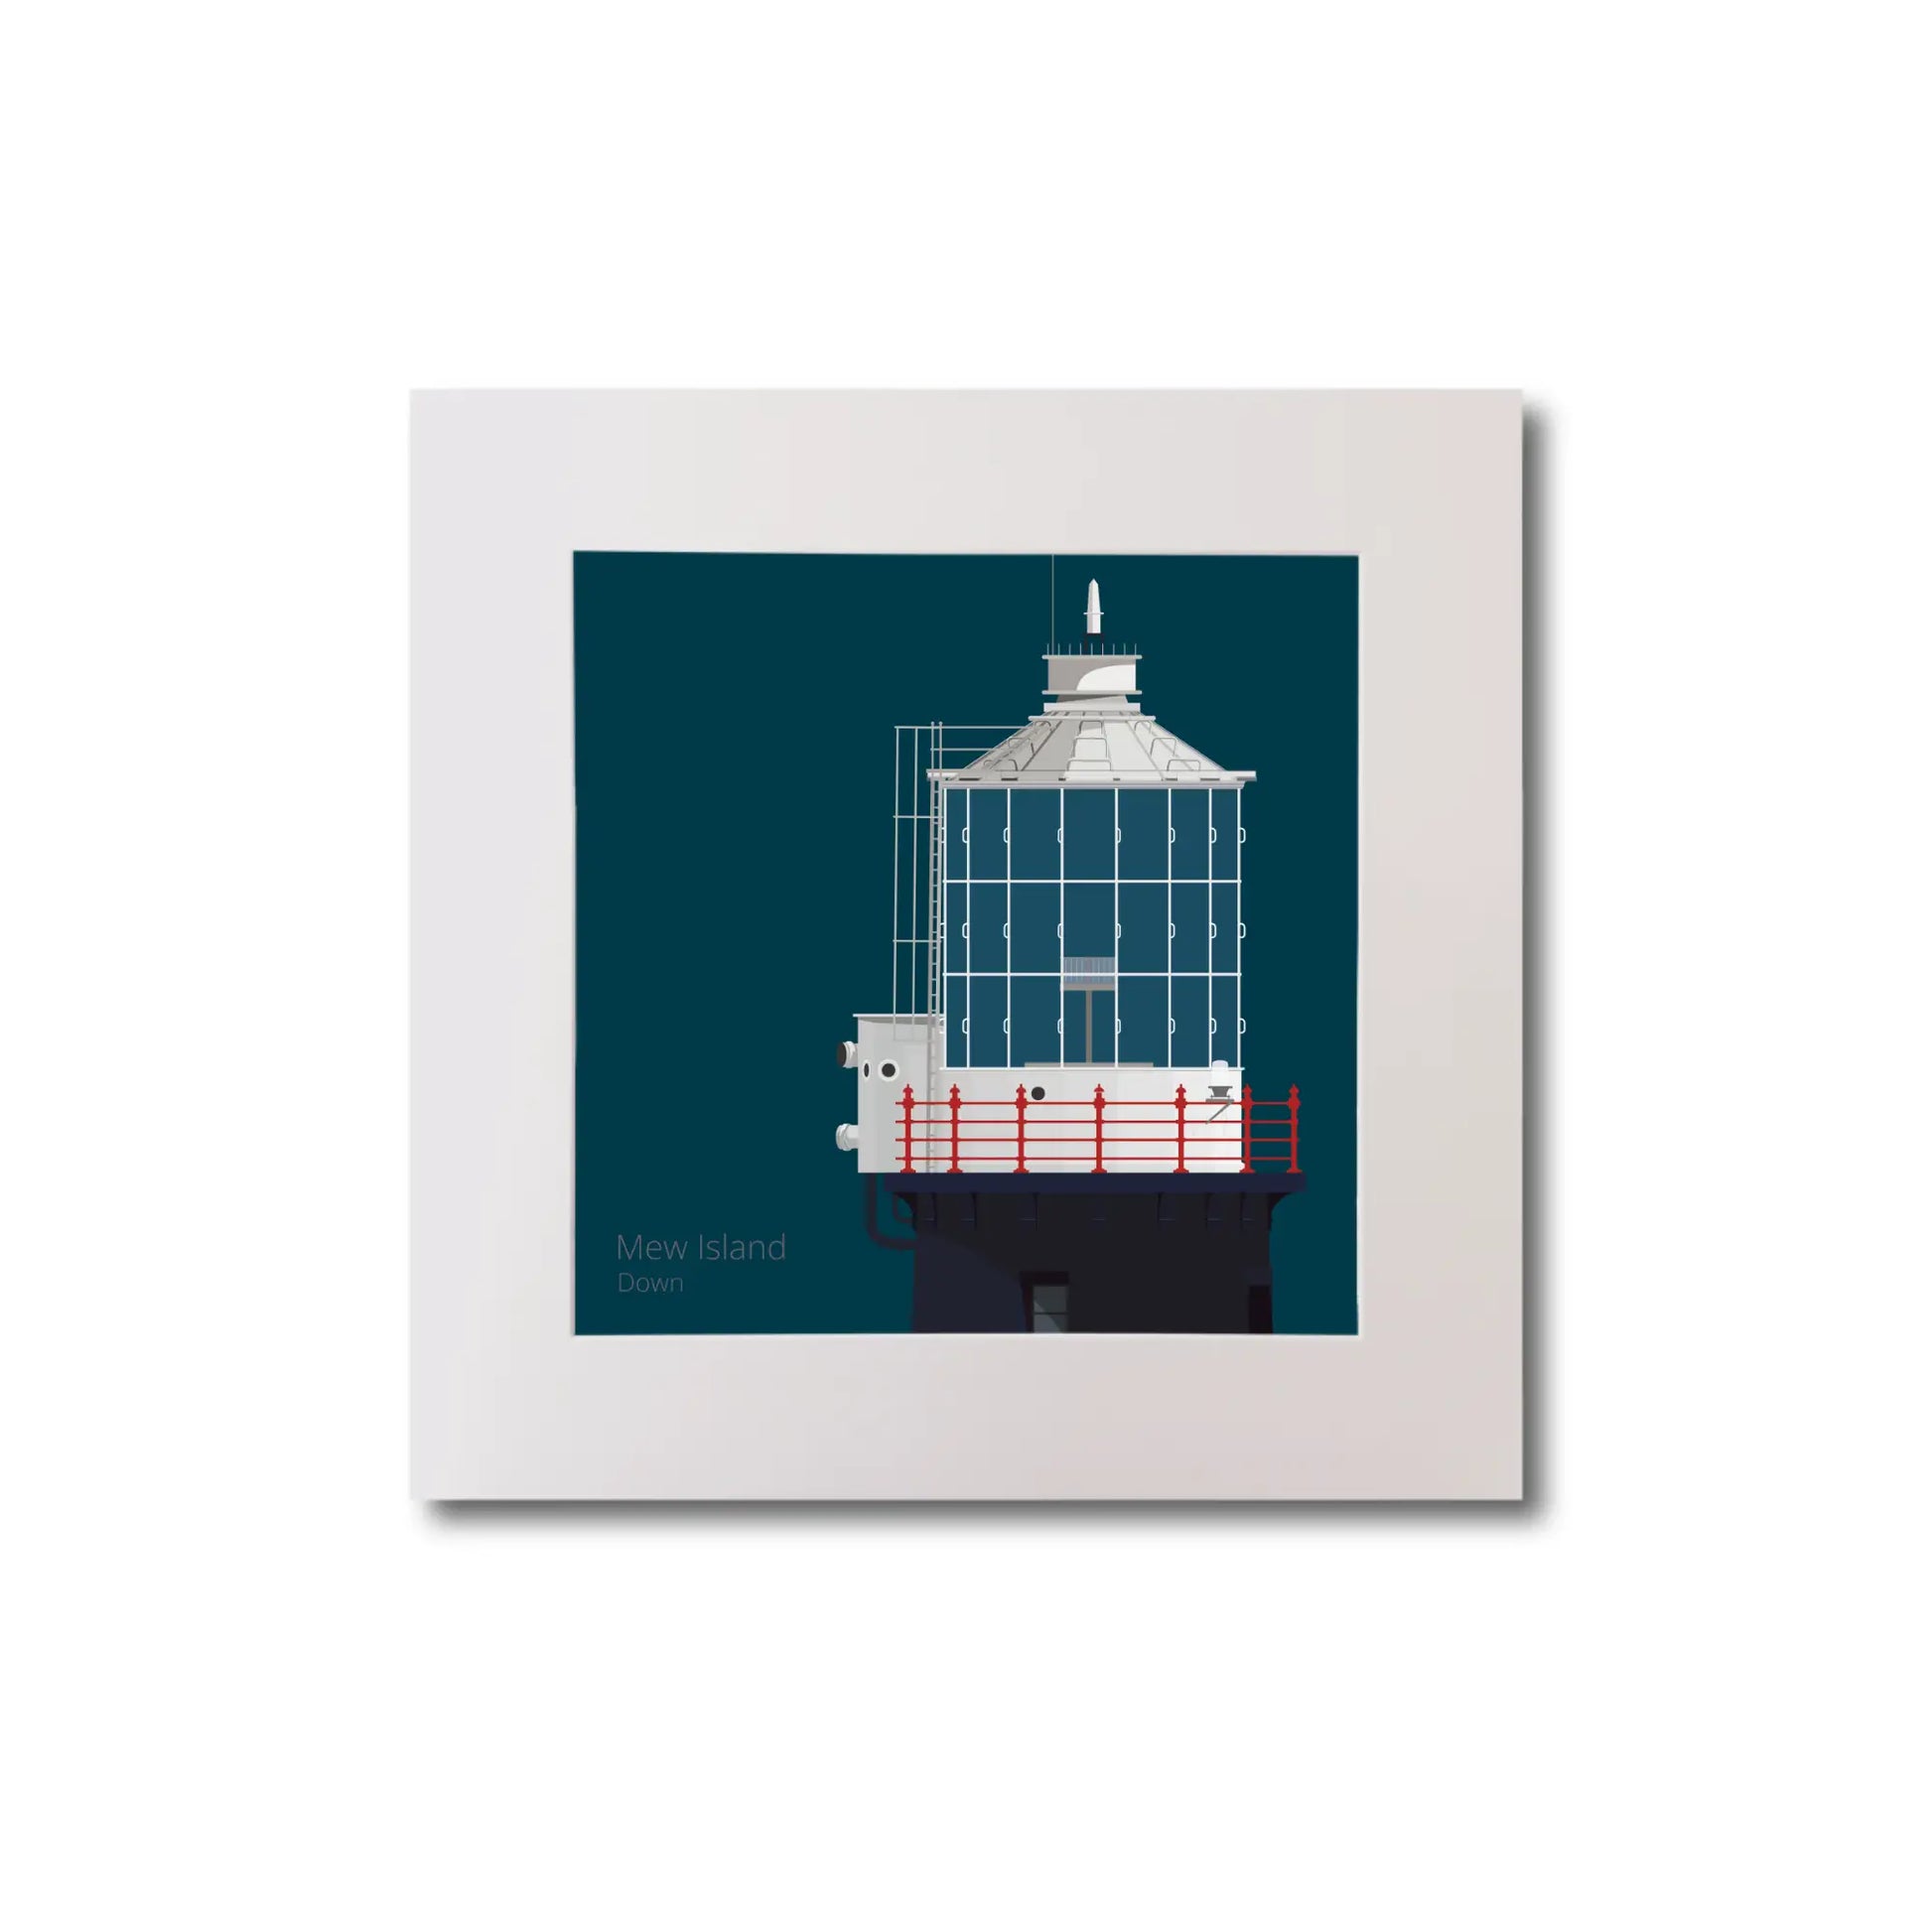 Illustration Mew Island lighthouse on a midnight blue background, mounted and measuring 20x20cm.